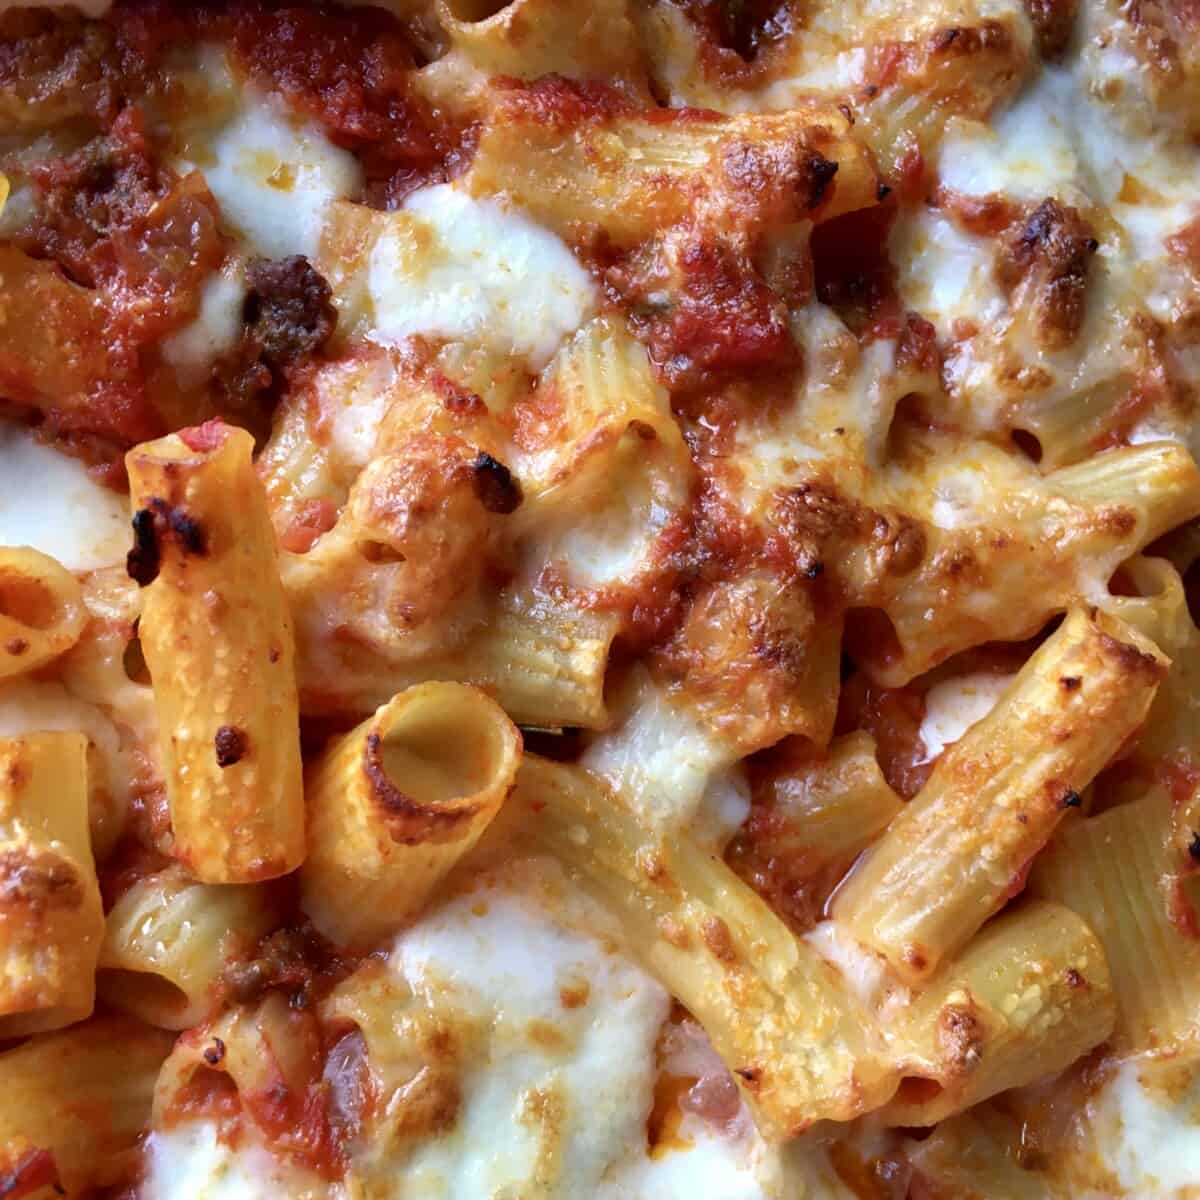 perfectly toasty, chewy, bubbling hot baked ziti